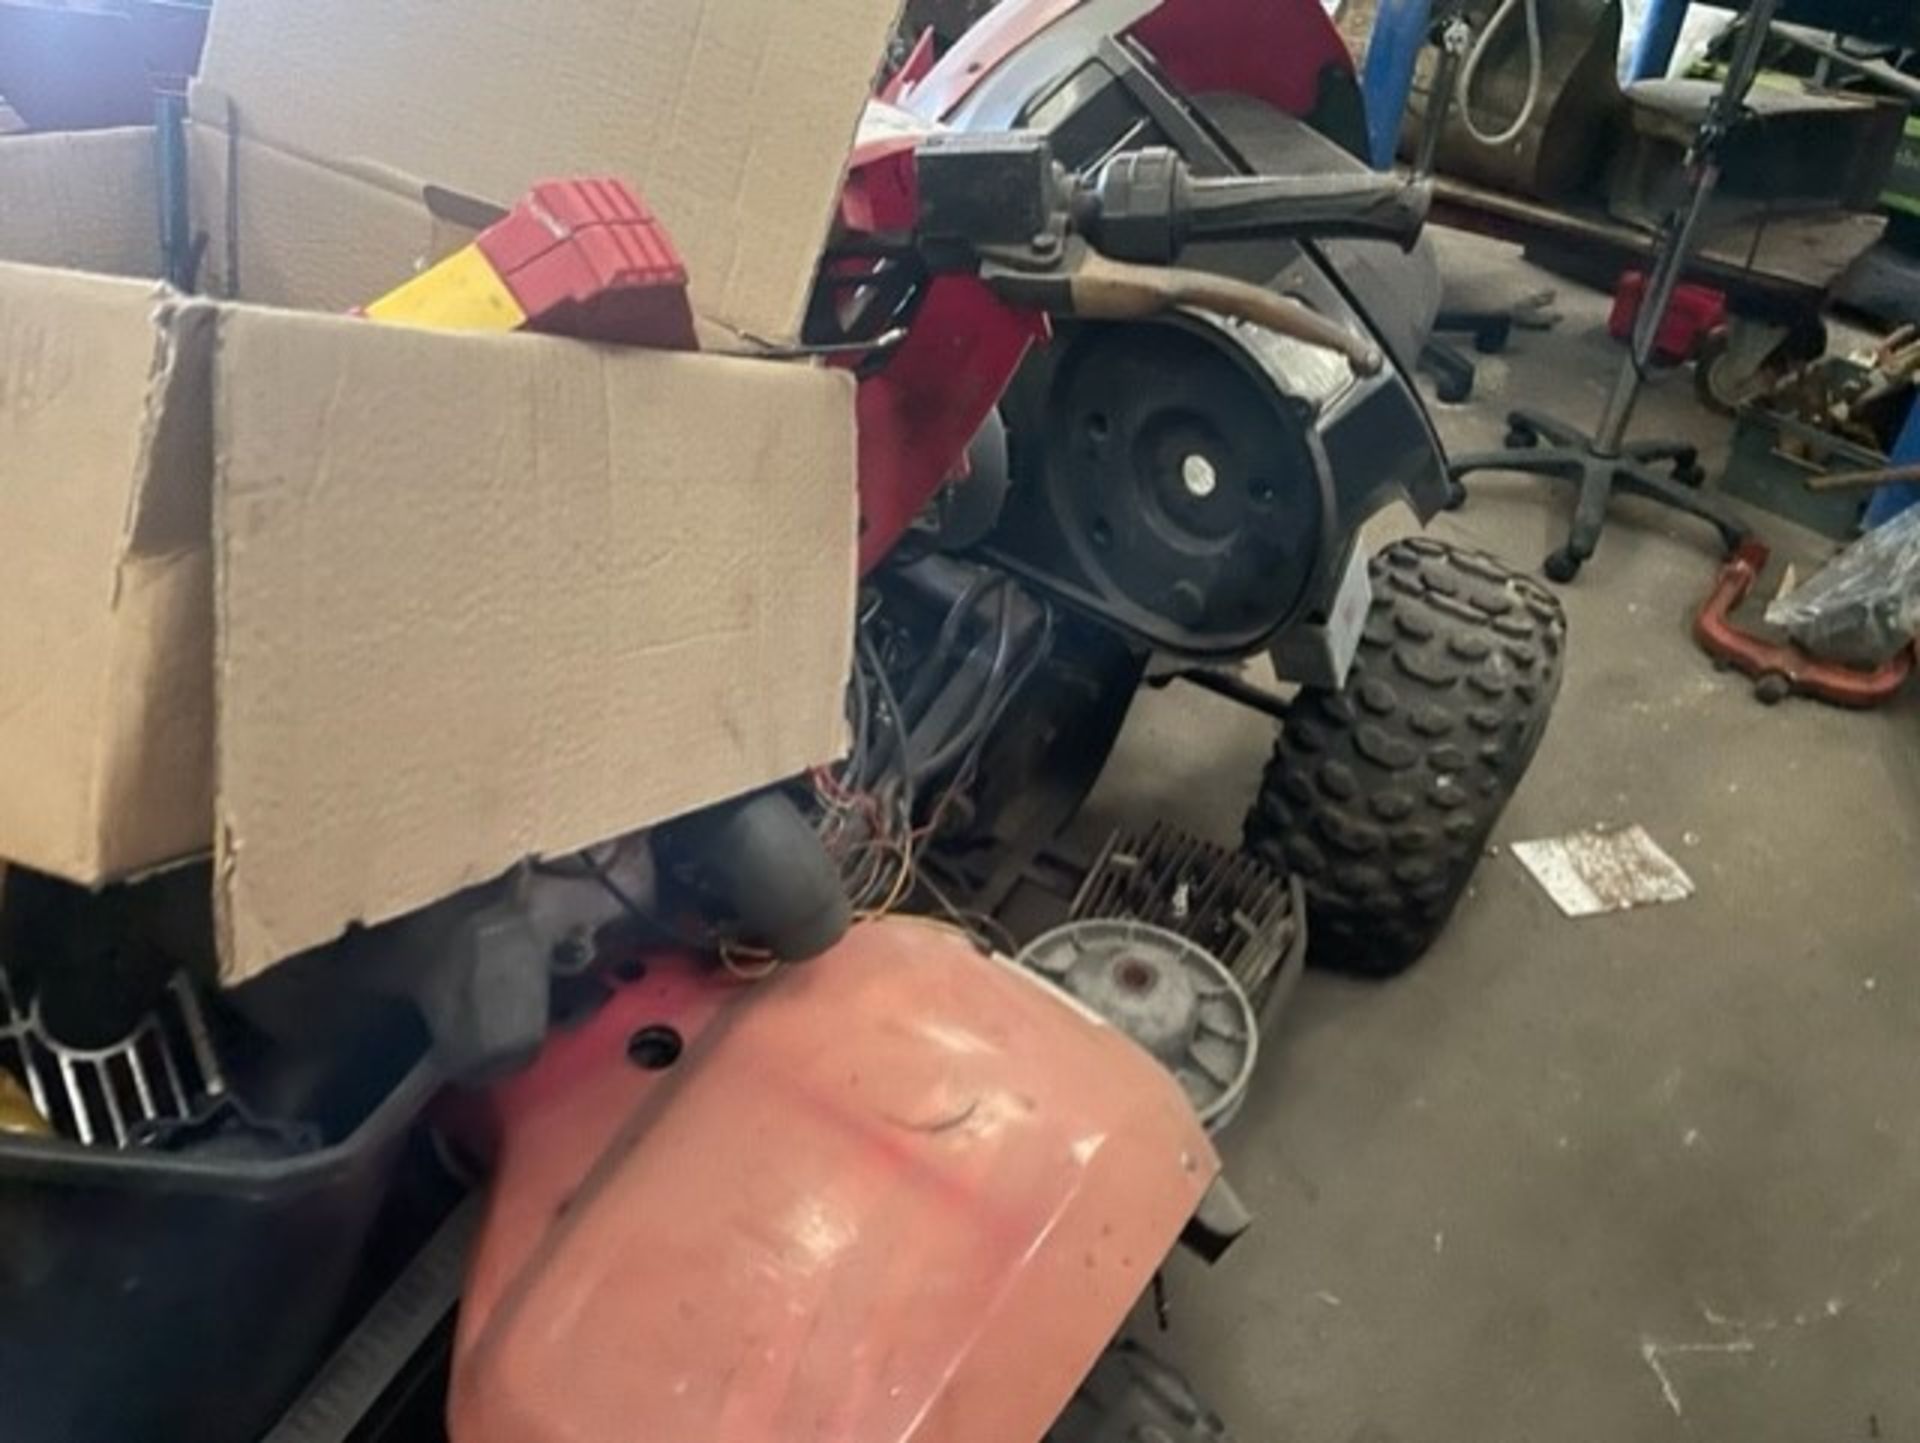 Polaris 250 2 stroke quad bike in bits as it needs a piston storey is I bought a piston but the - Image 3 of 8